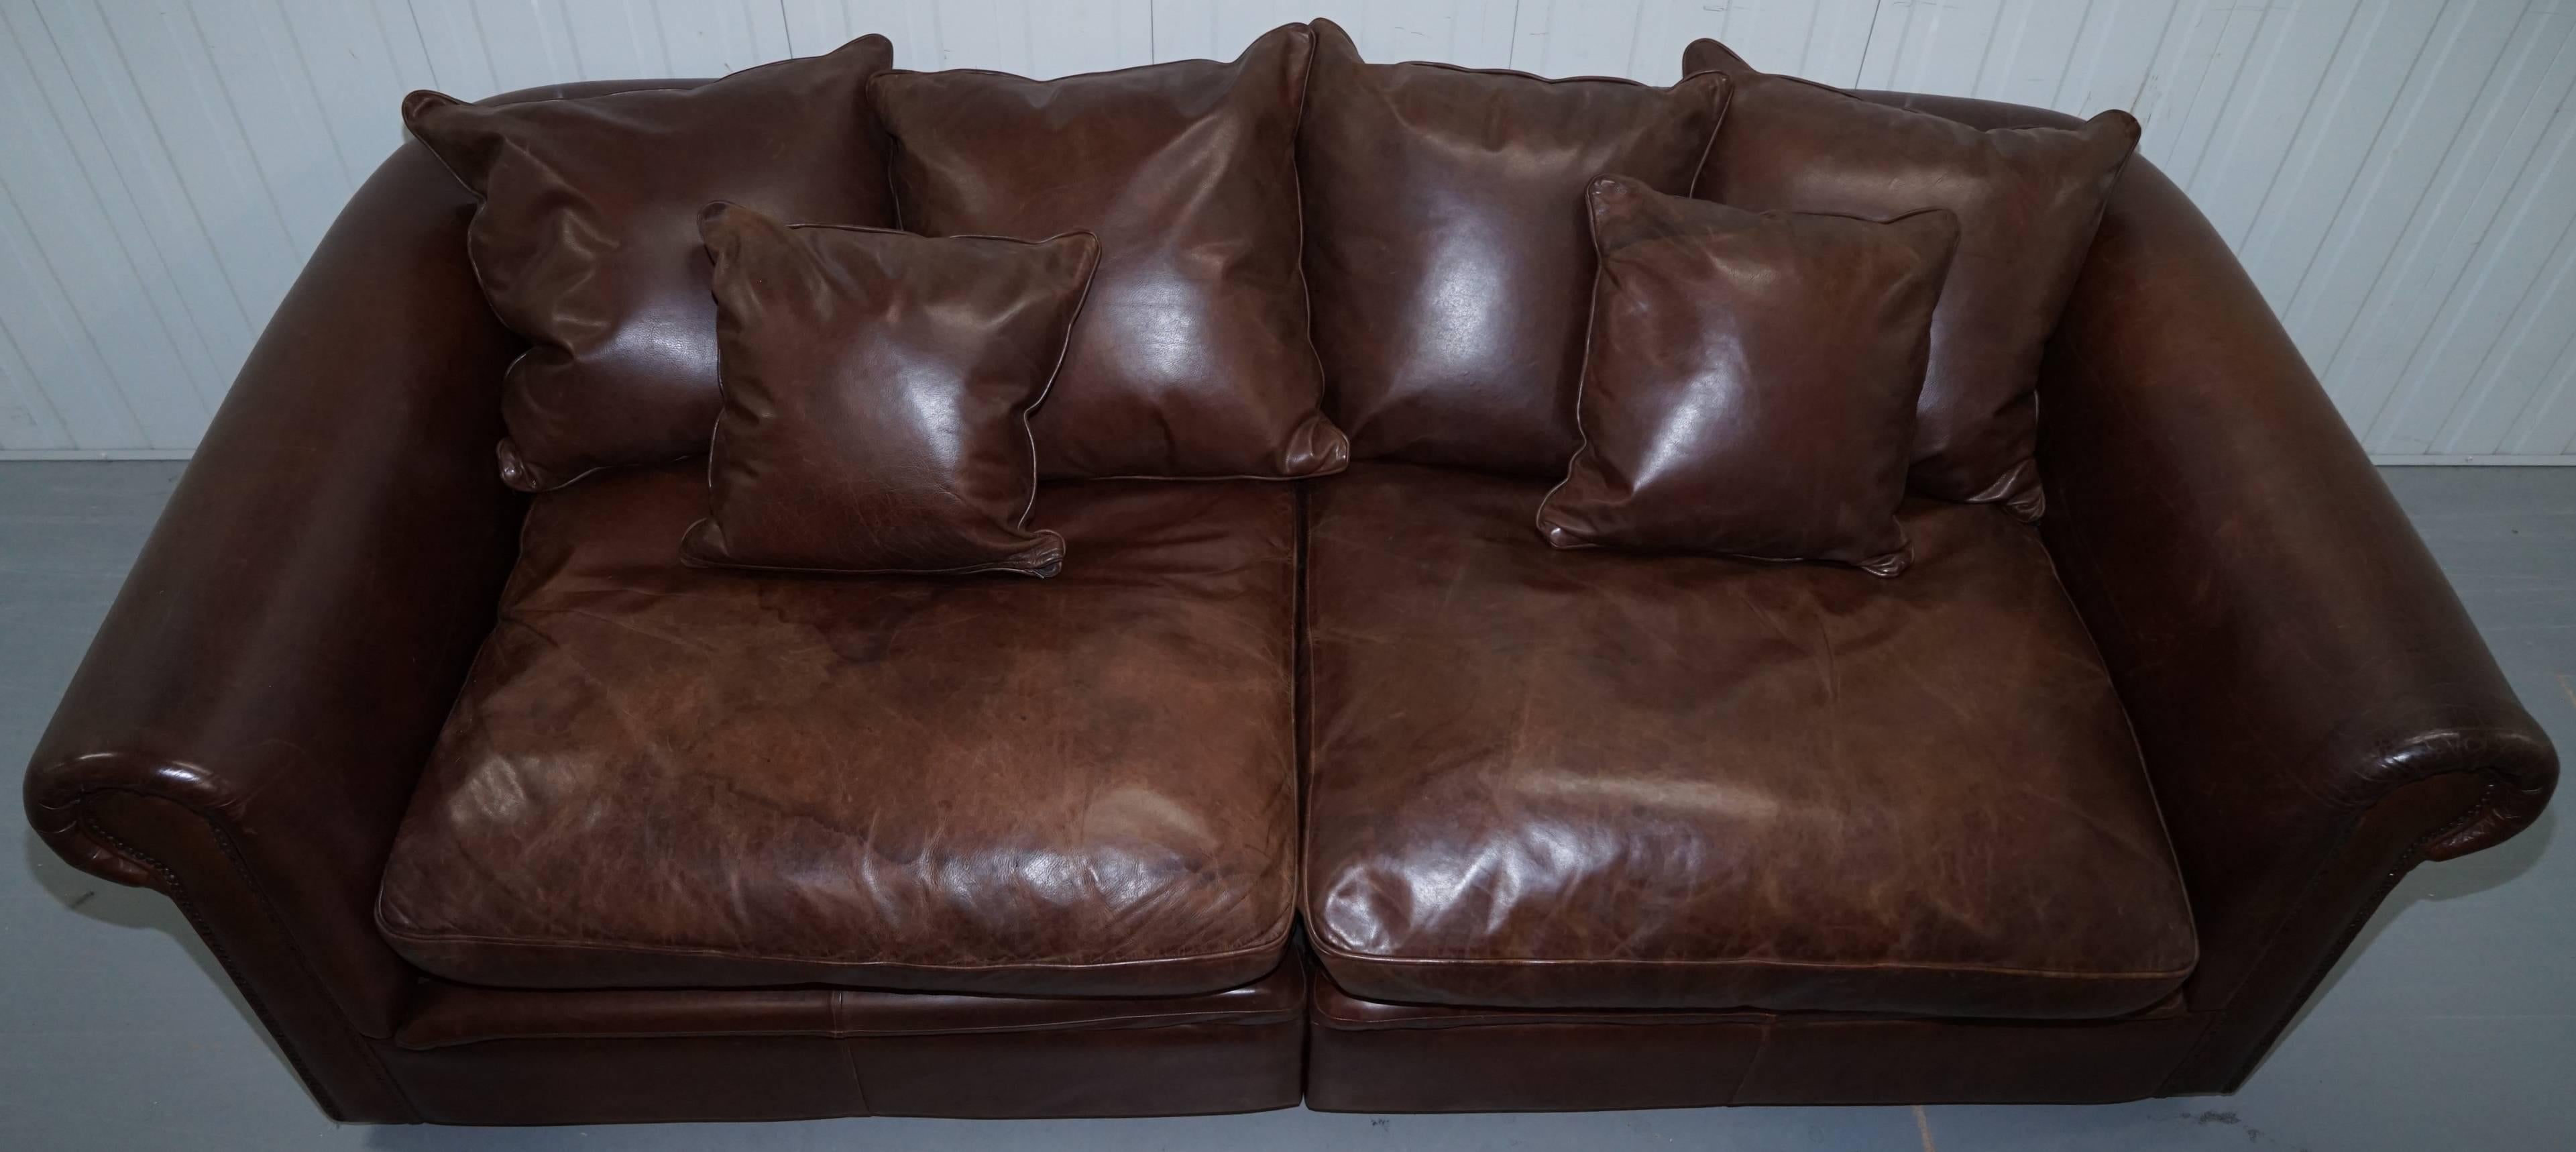 Knightsbridge Collin & Hayes Brown Leather Sofa Splits in Two Pieces 6